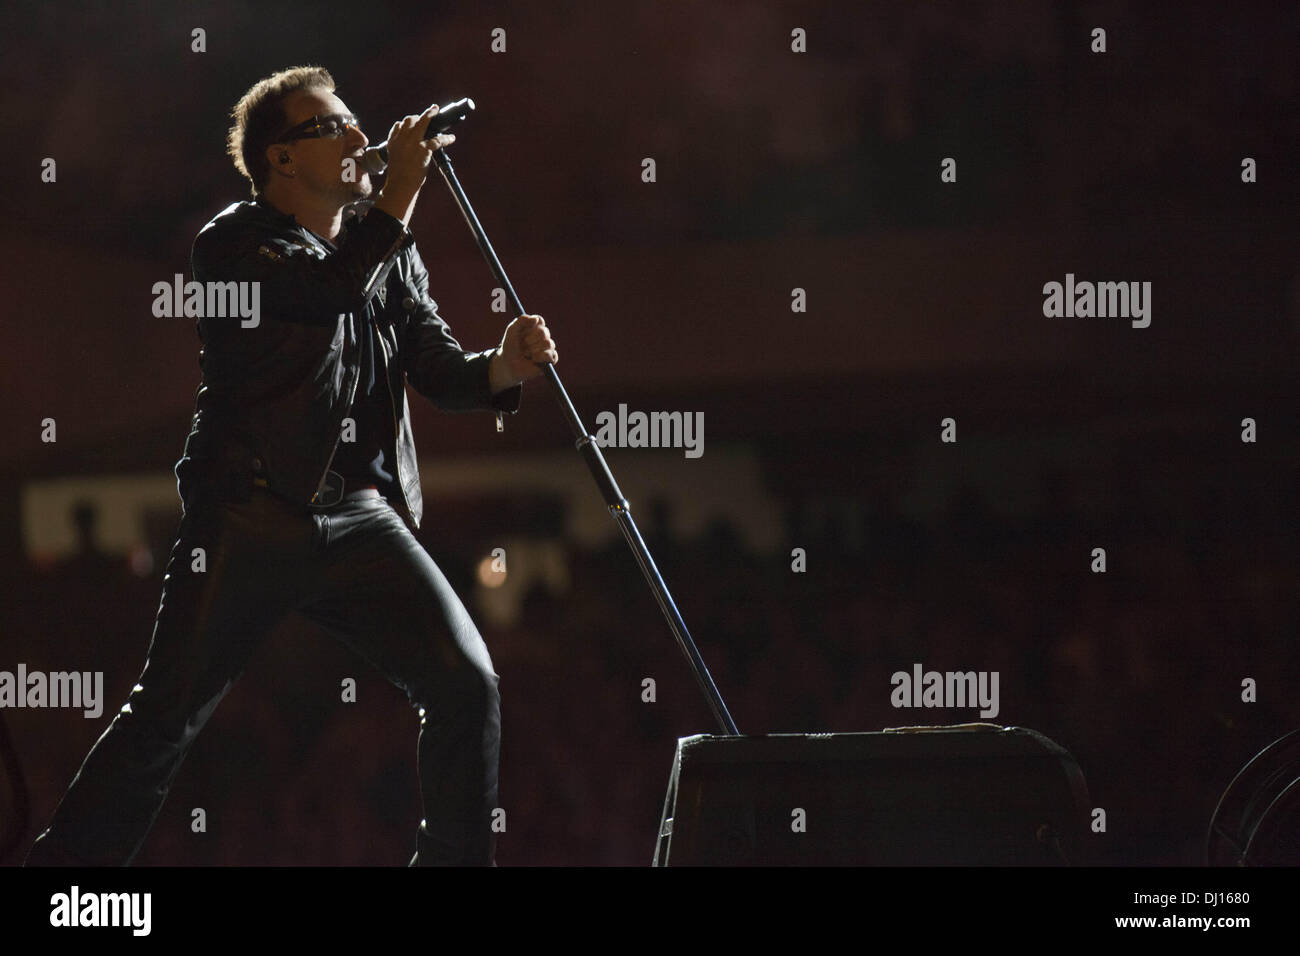 Chicago, Illinois, USA. 5th July, 2011. Vocalist BONO of U2 performs on 360 Tour at Soldier Field in Chicago, Illinois © Daniel DeSlover/ZUMAPRESS.com/Alamy Live News Stock Photo